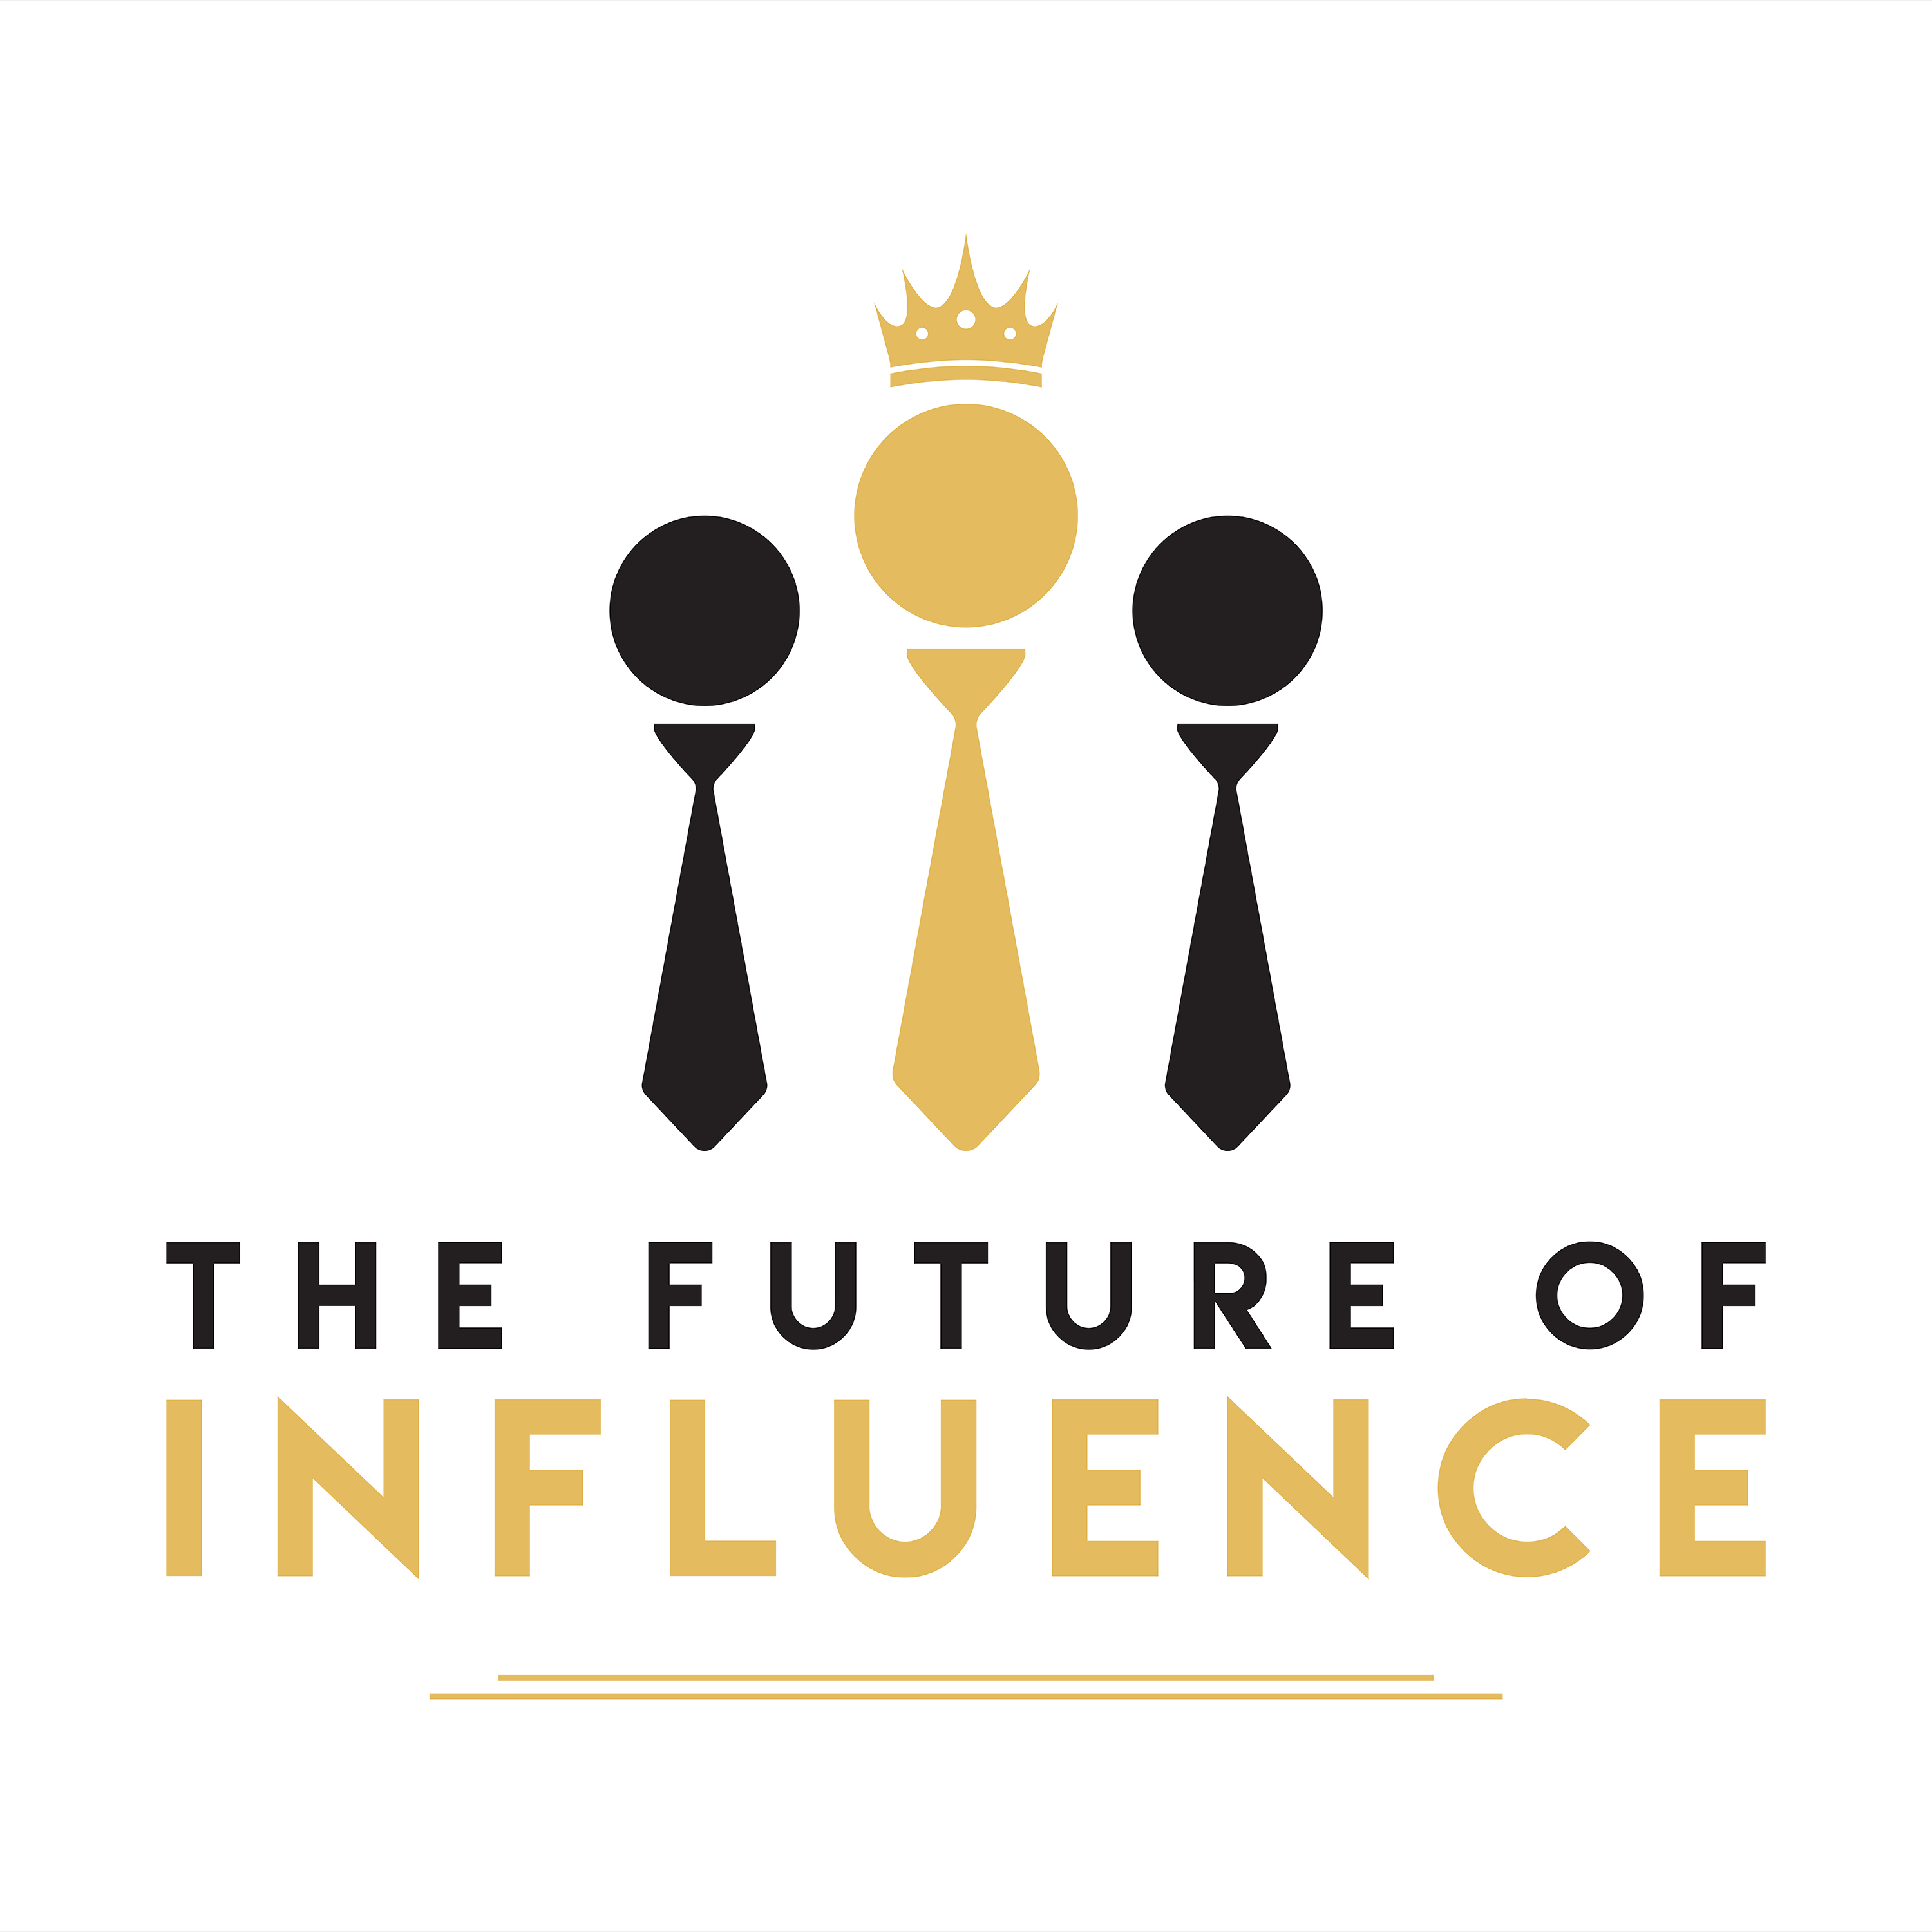 Artwork for The Future of Influence